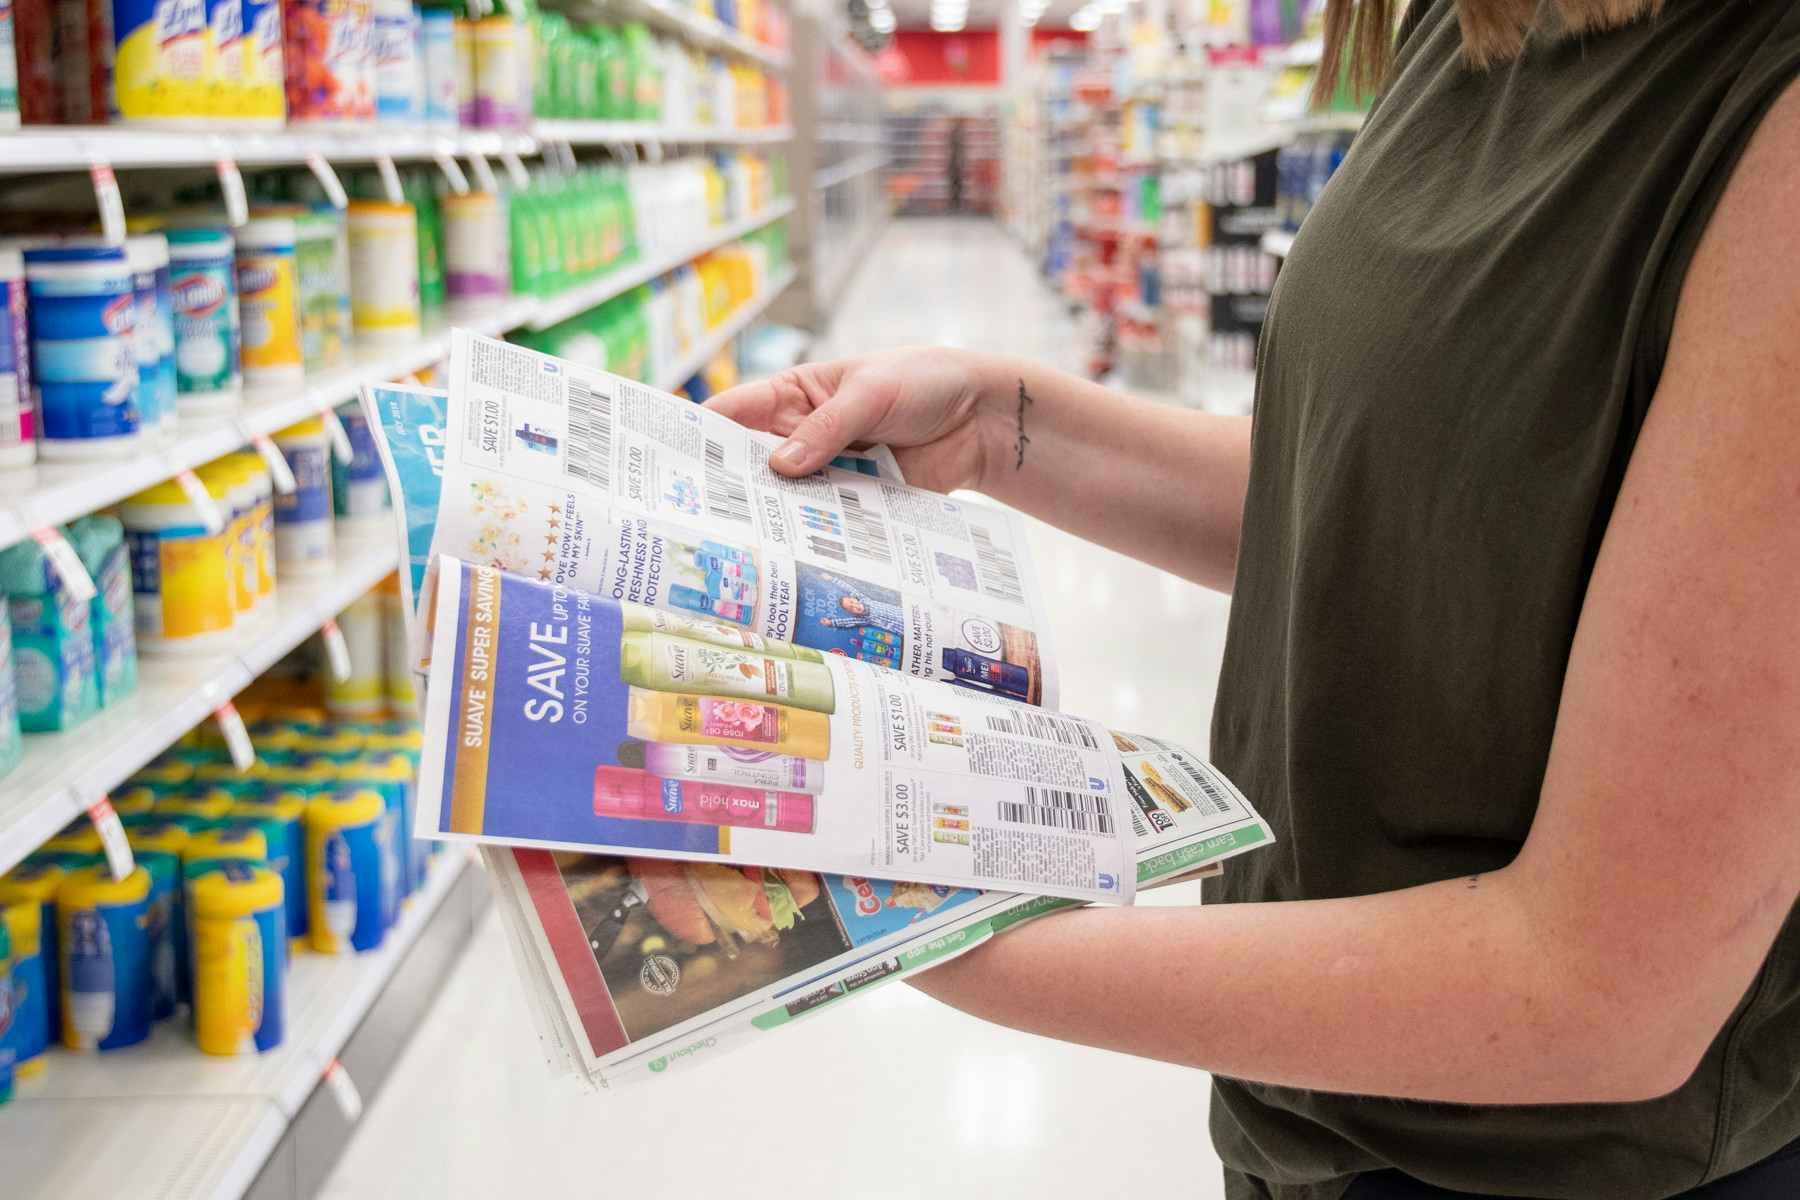 A woman flipping through newspaper coupons in a grocery store aisle 